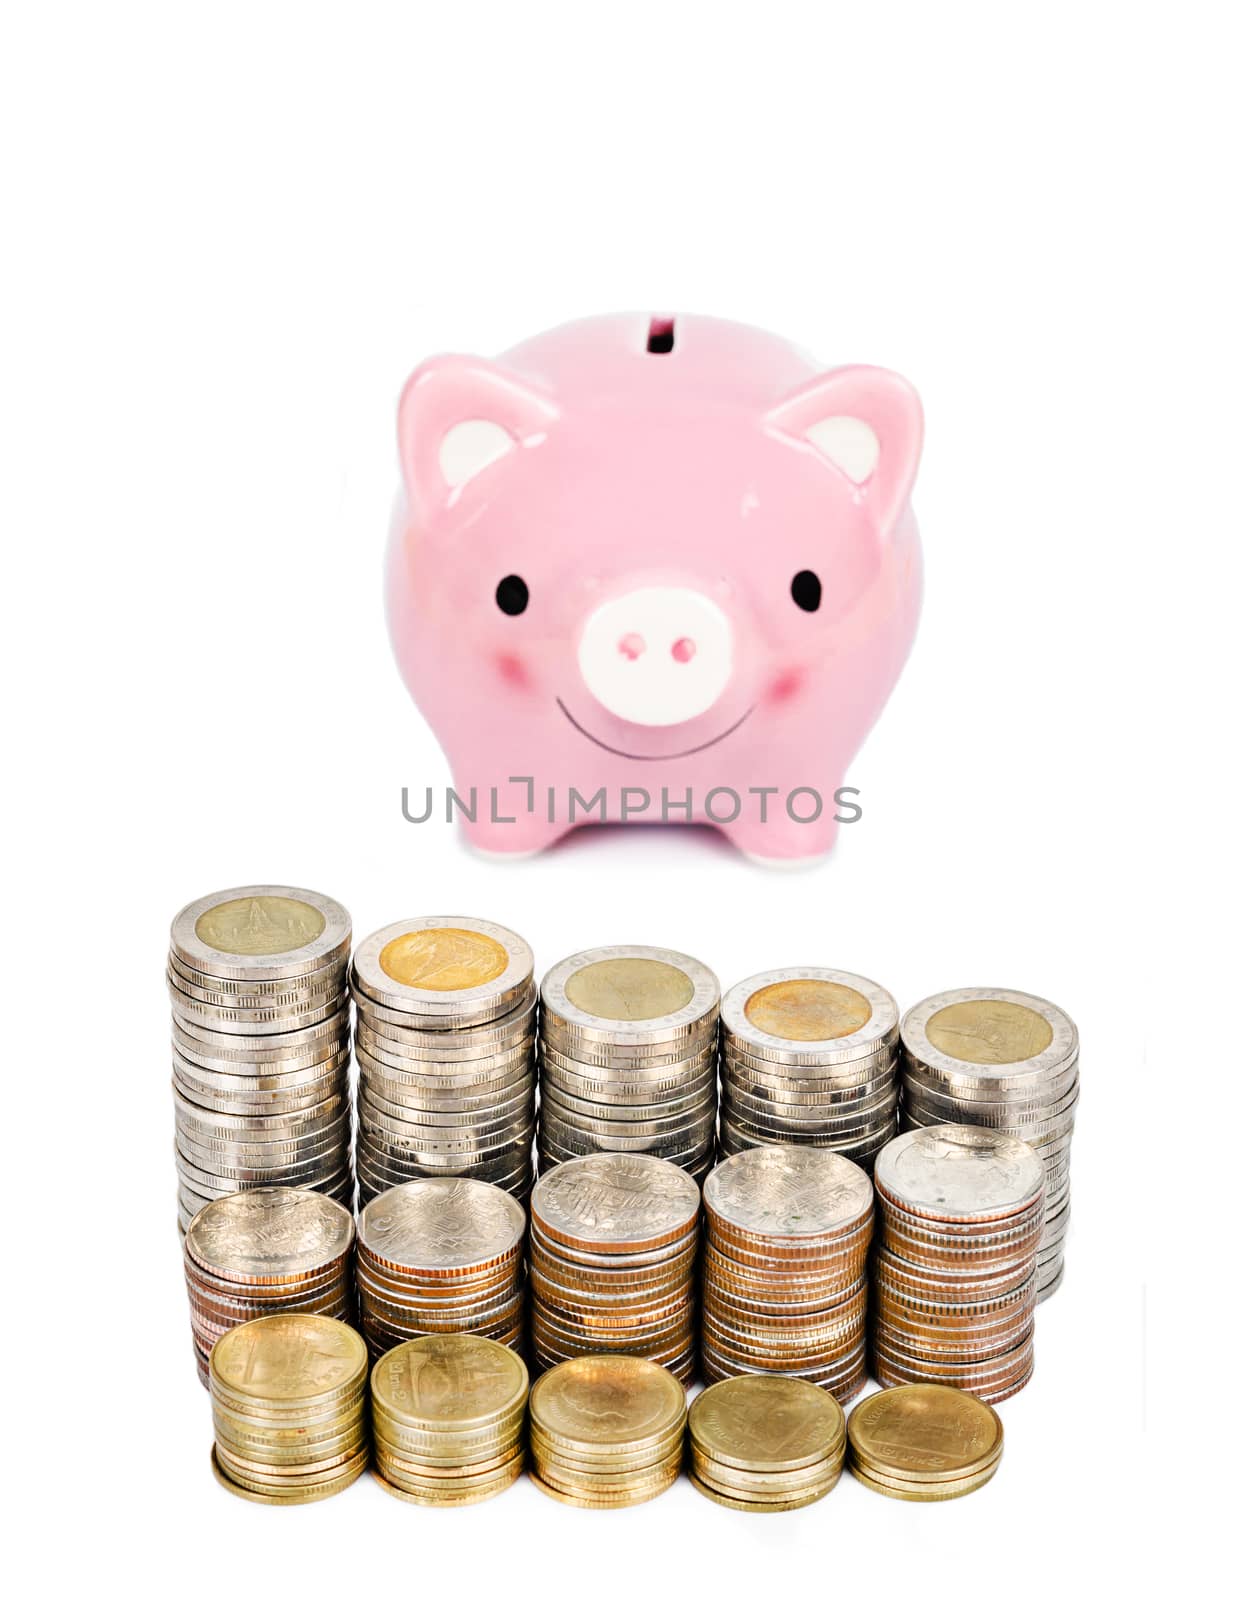 Money coins tower and pink piggybank isolated on white background.